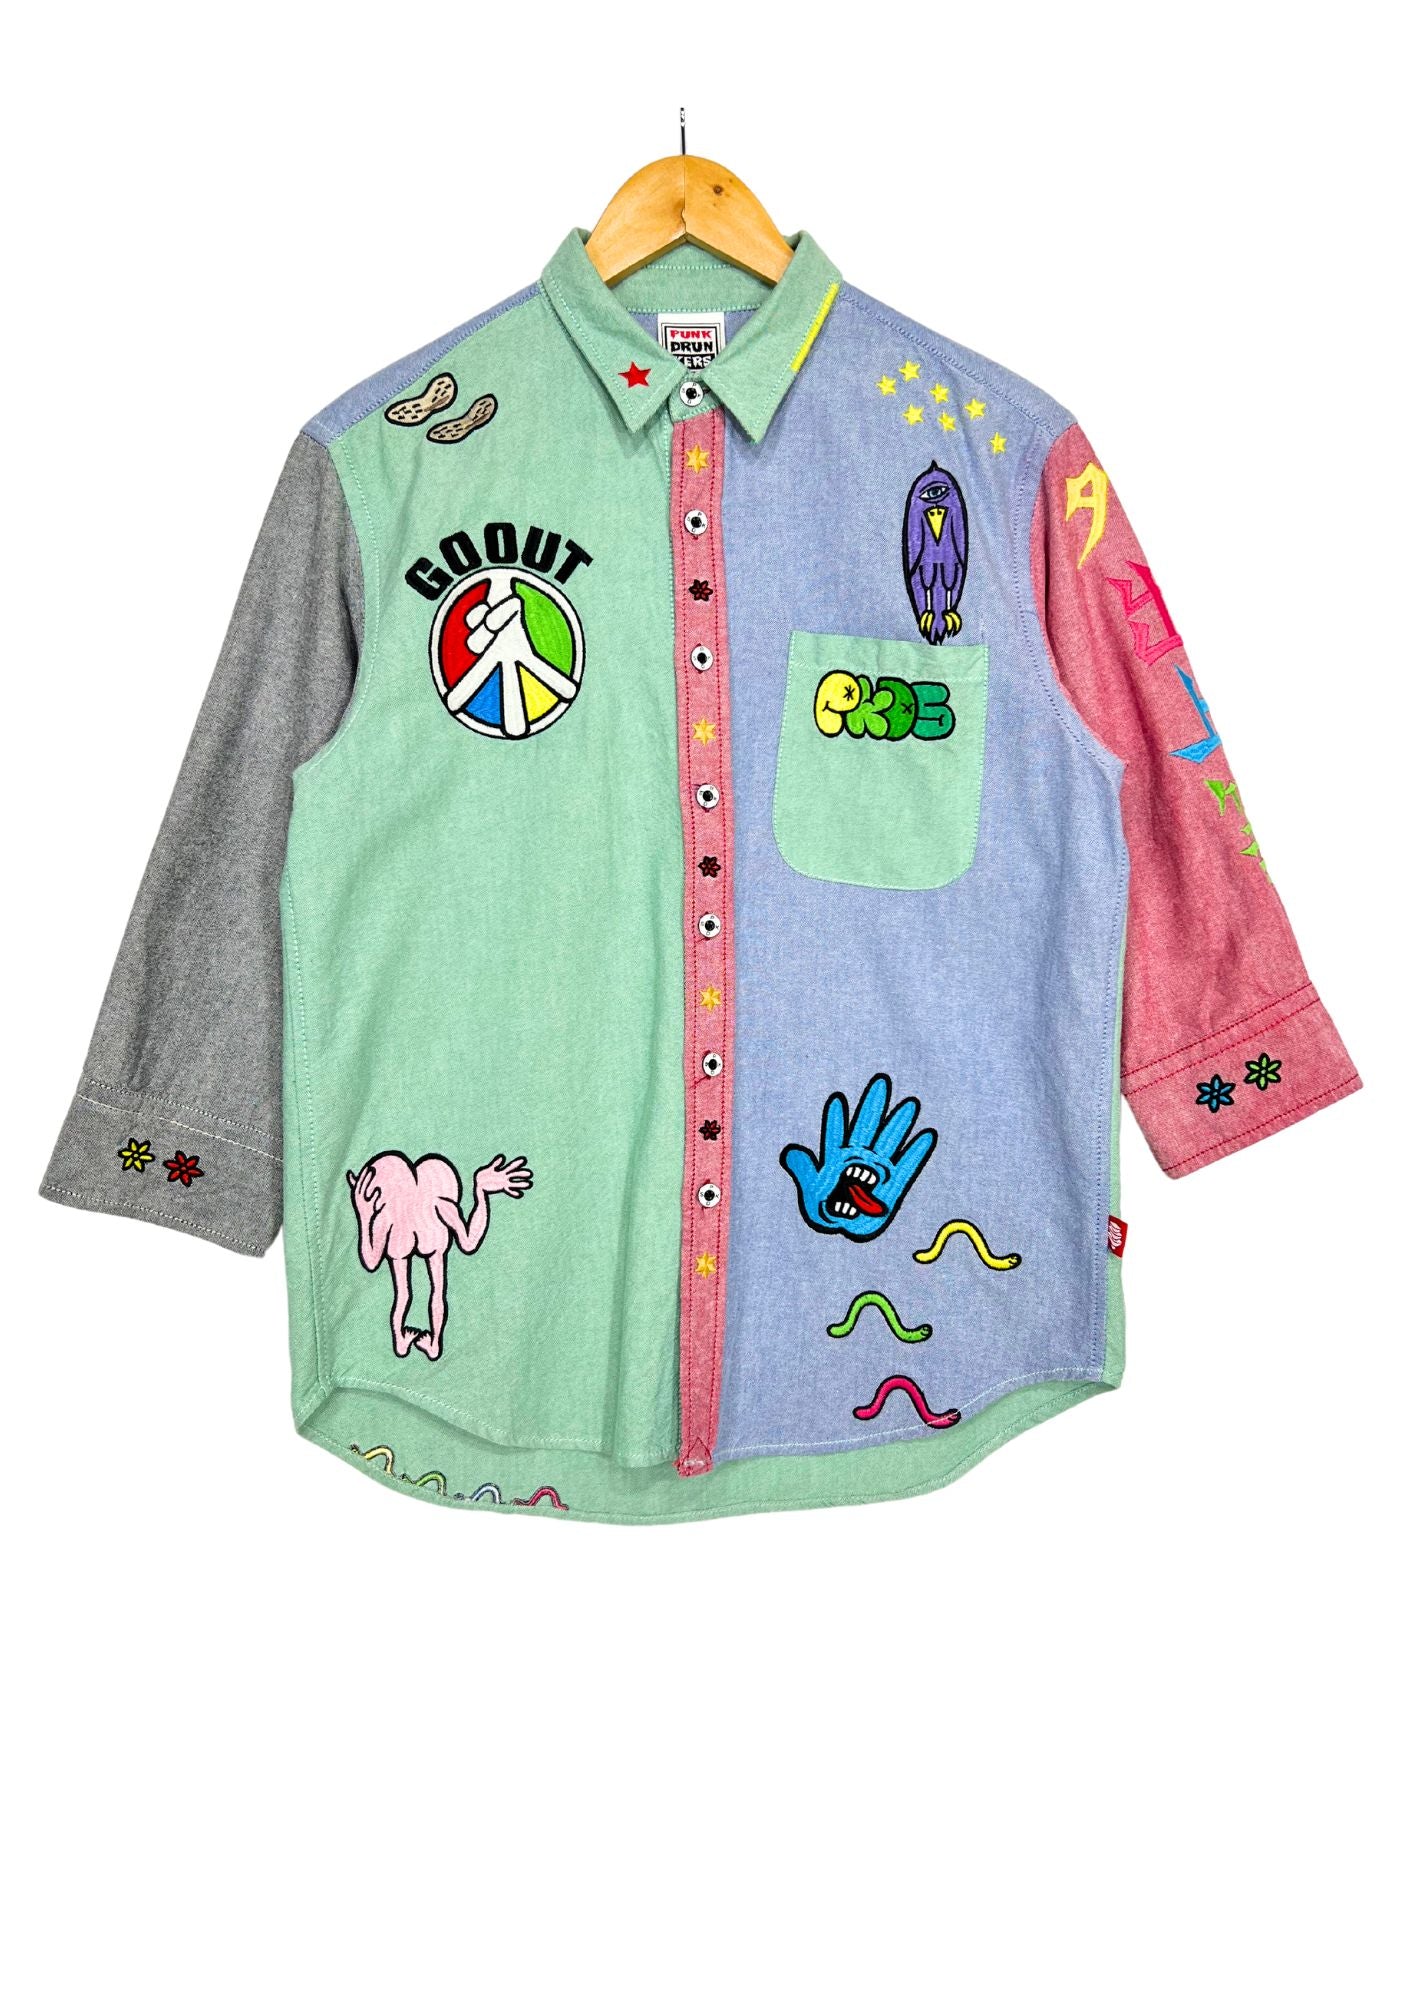 2010s PUNK DRUNKERS Cyberba Embroidered Shirts